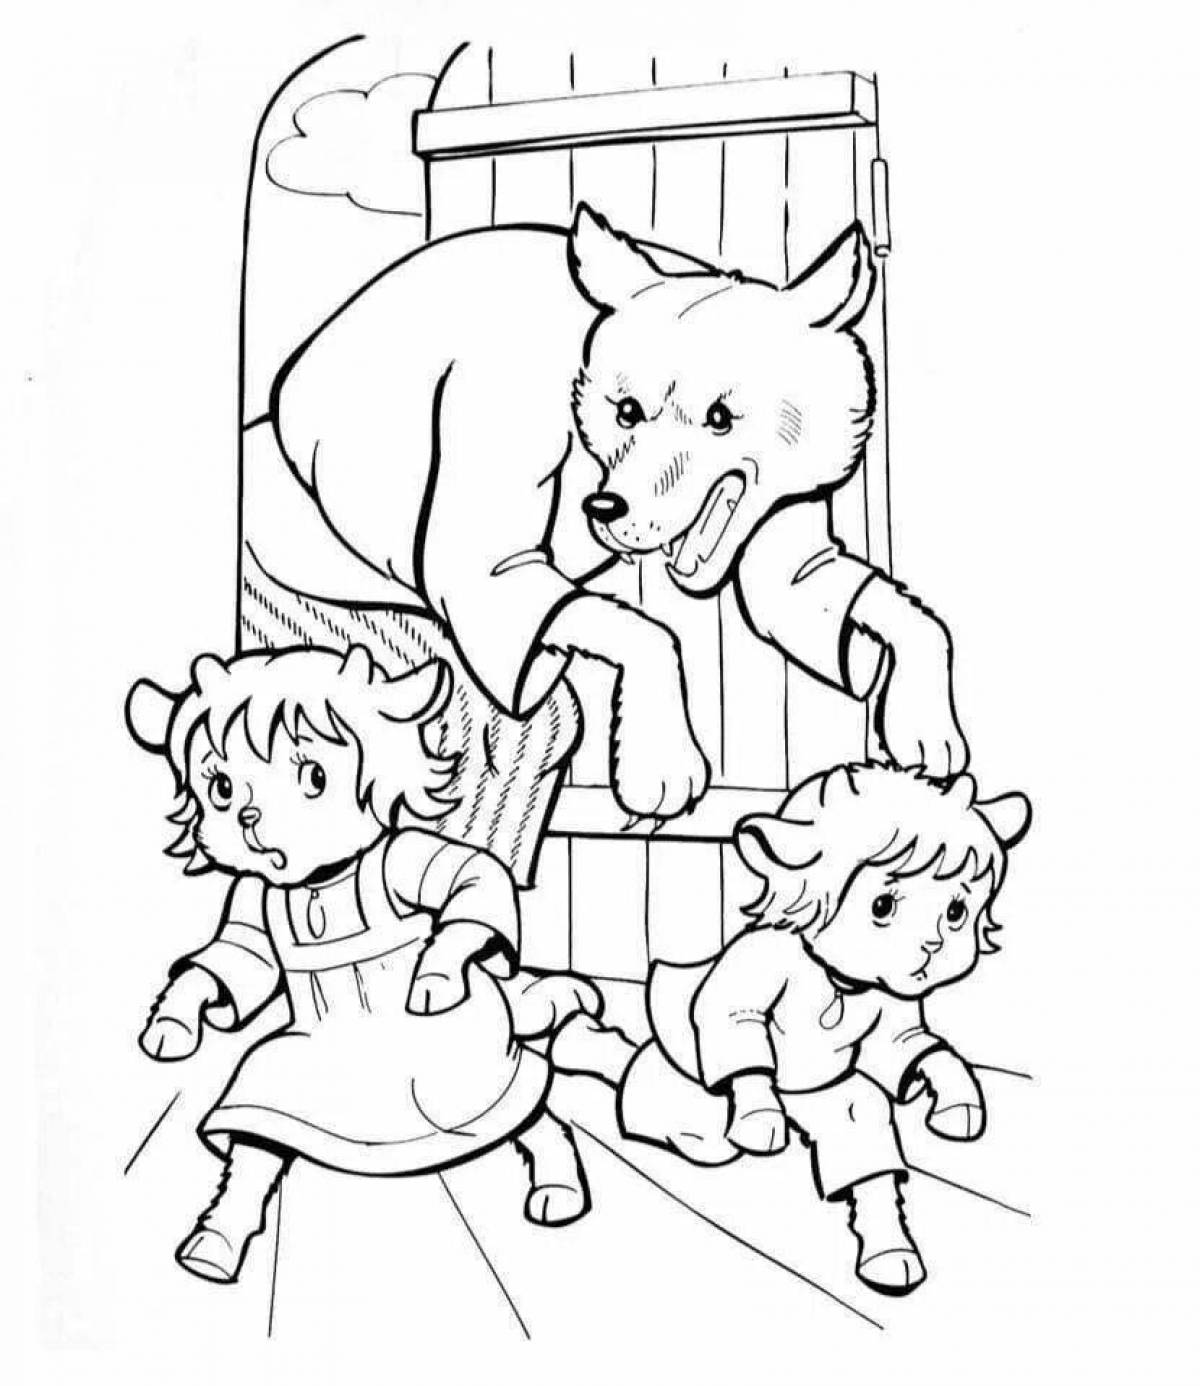 Wolf and kids glamor coloring book